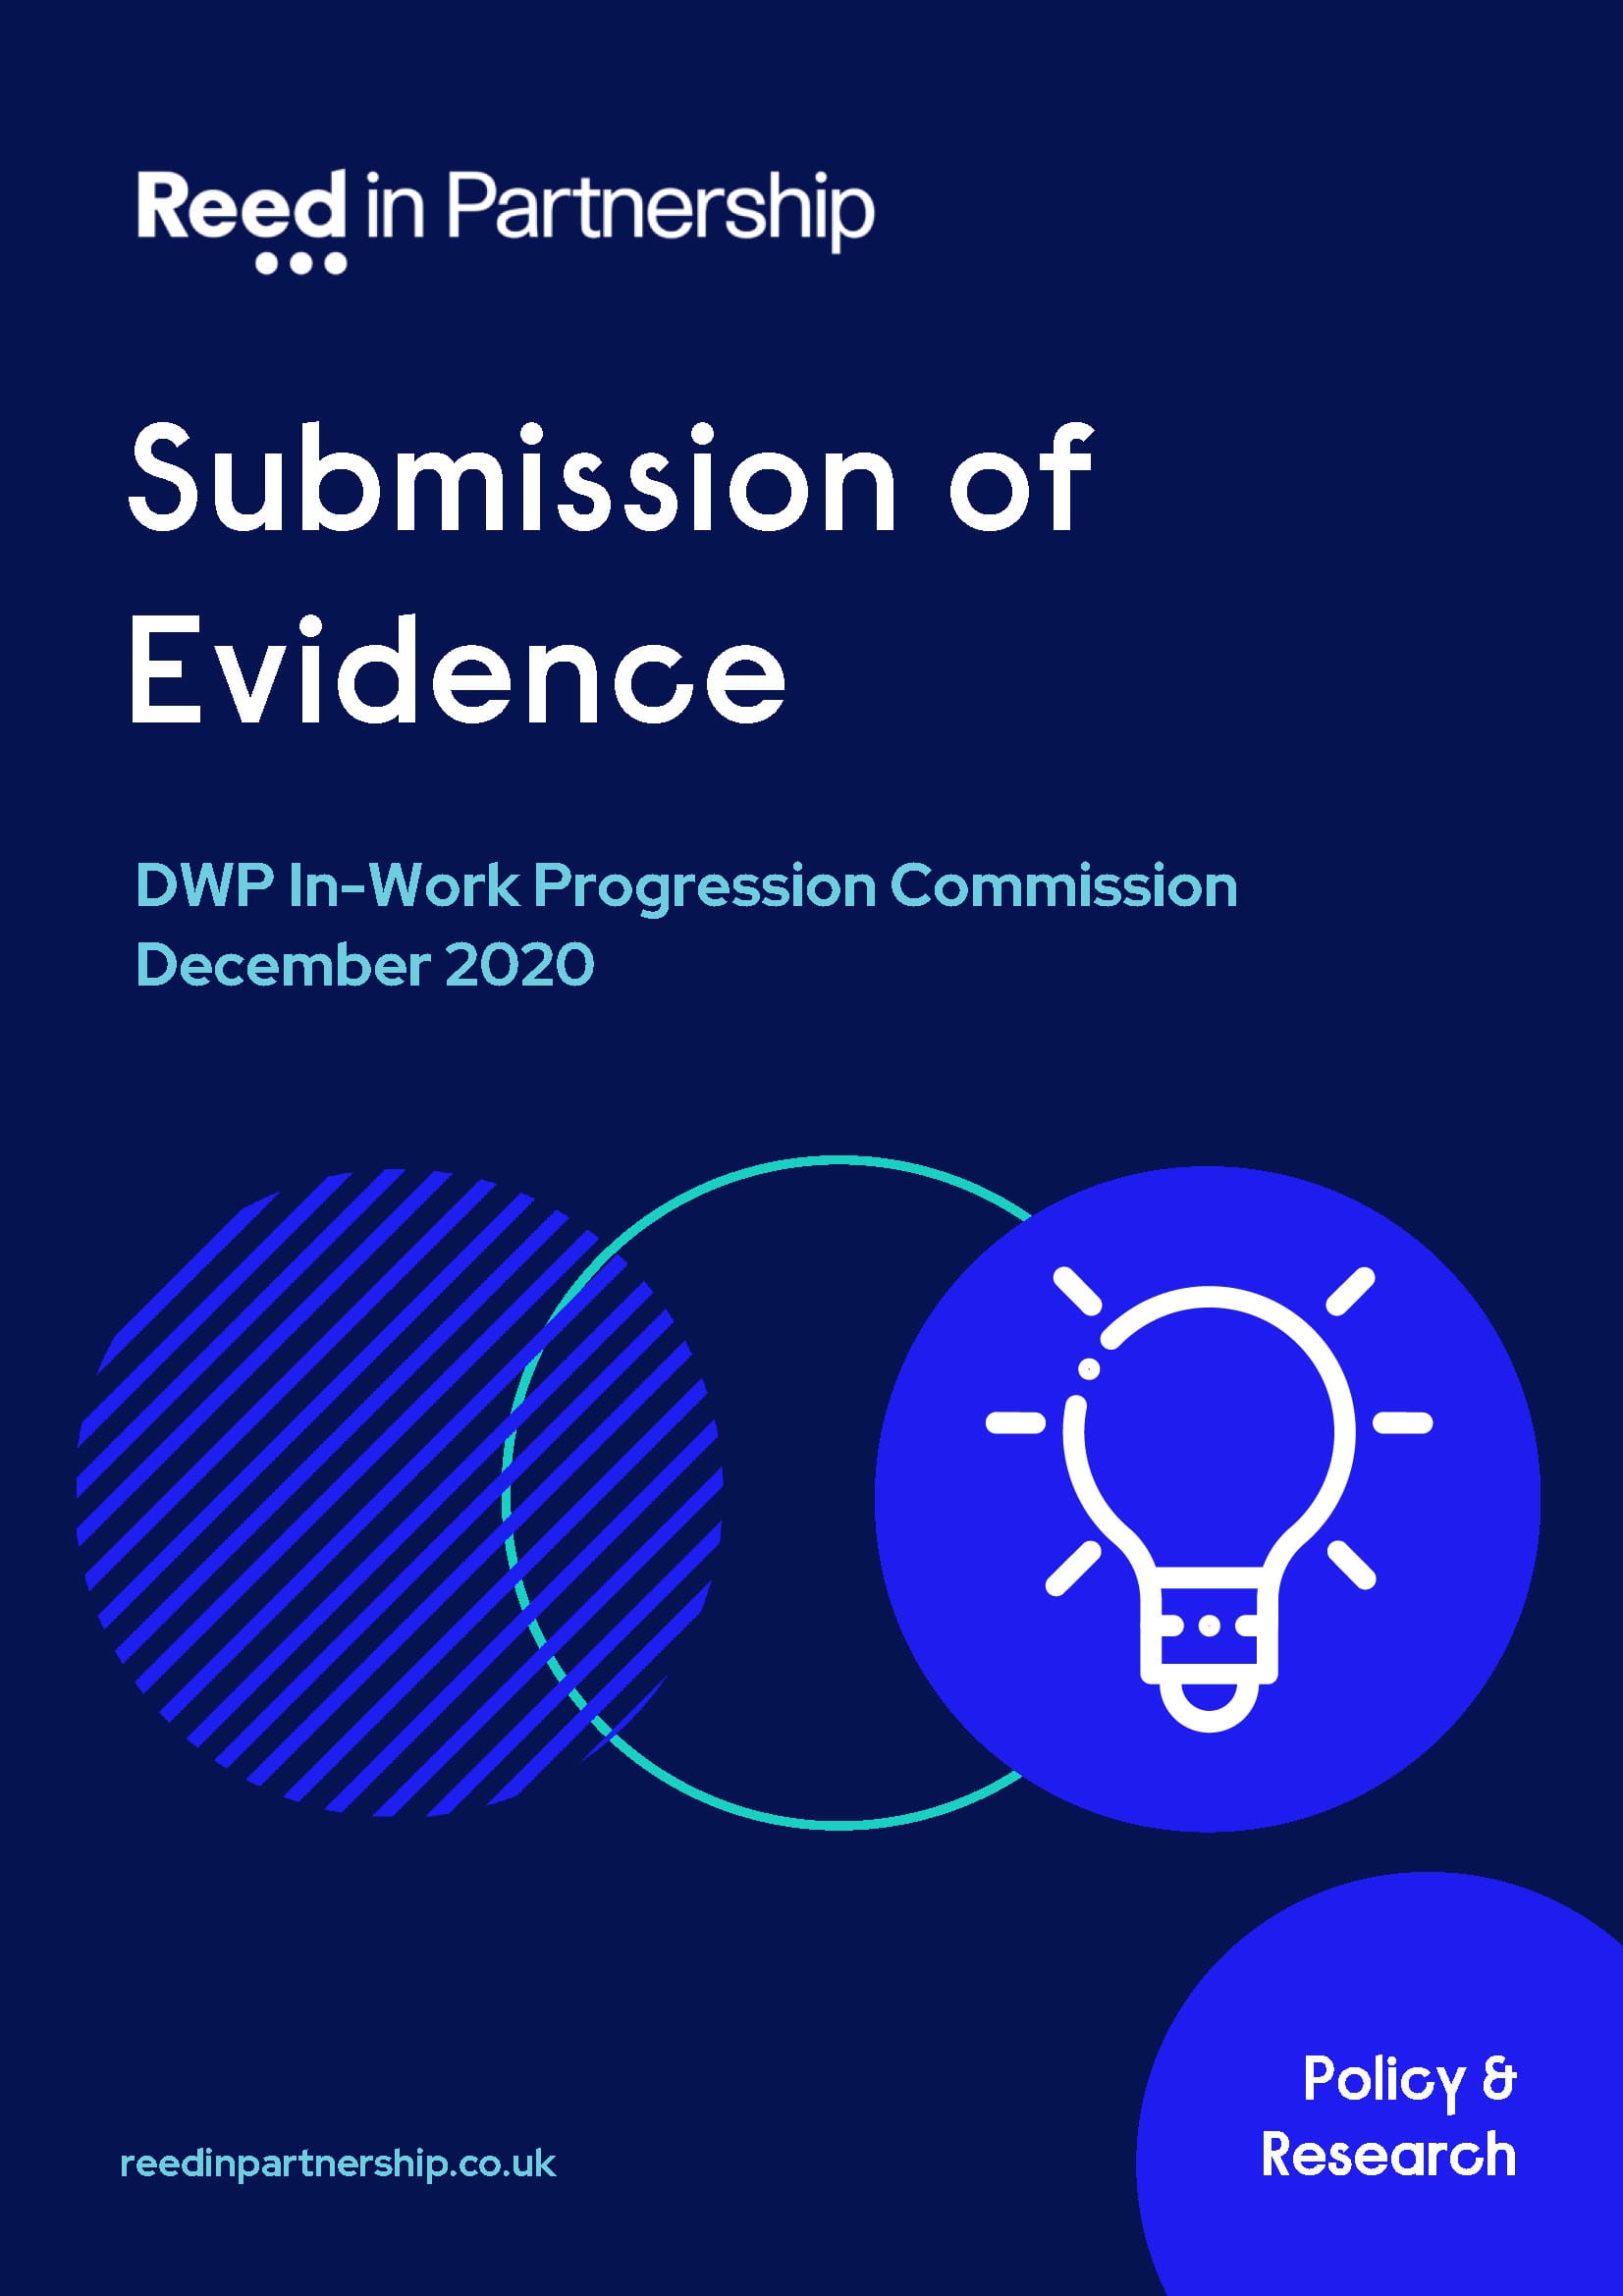 Submission of Evidence - DWP In-Work Progression Commision